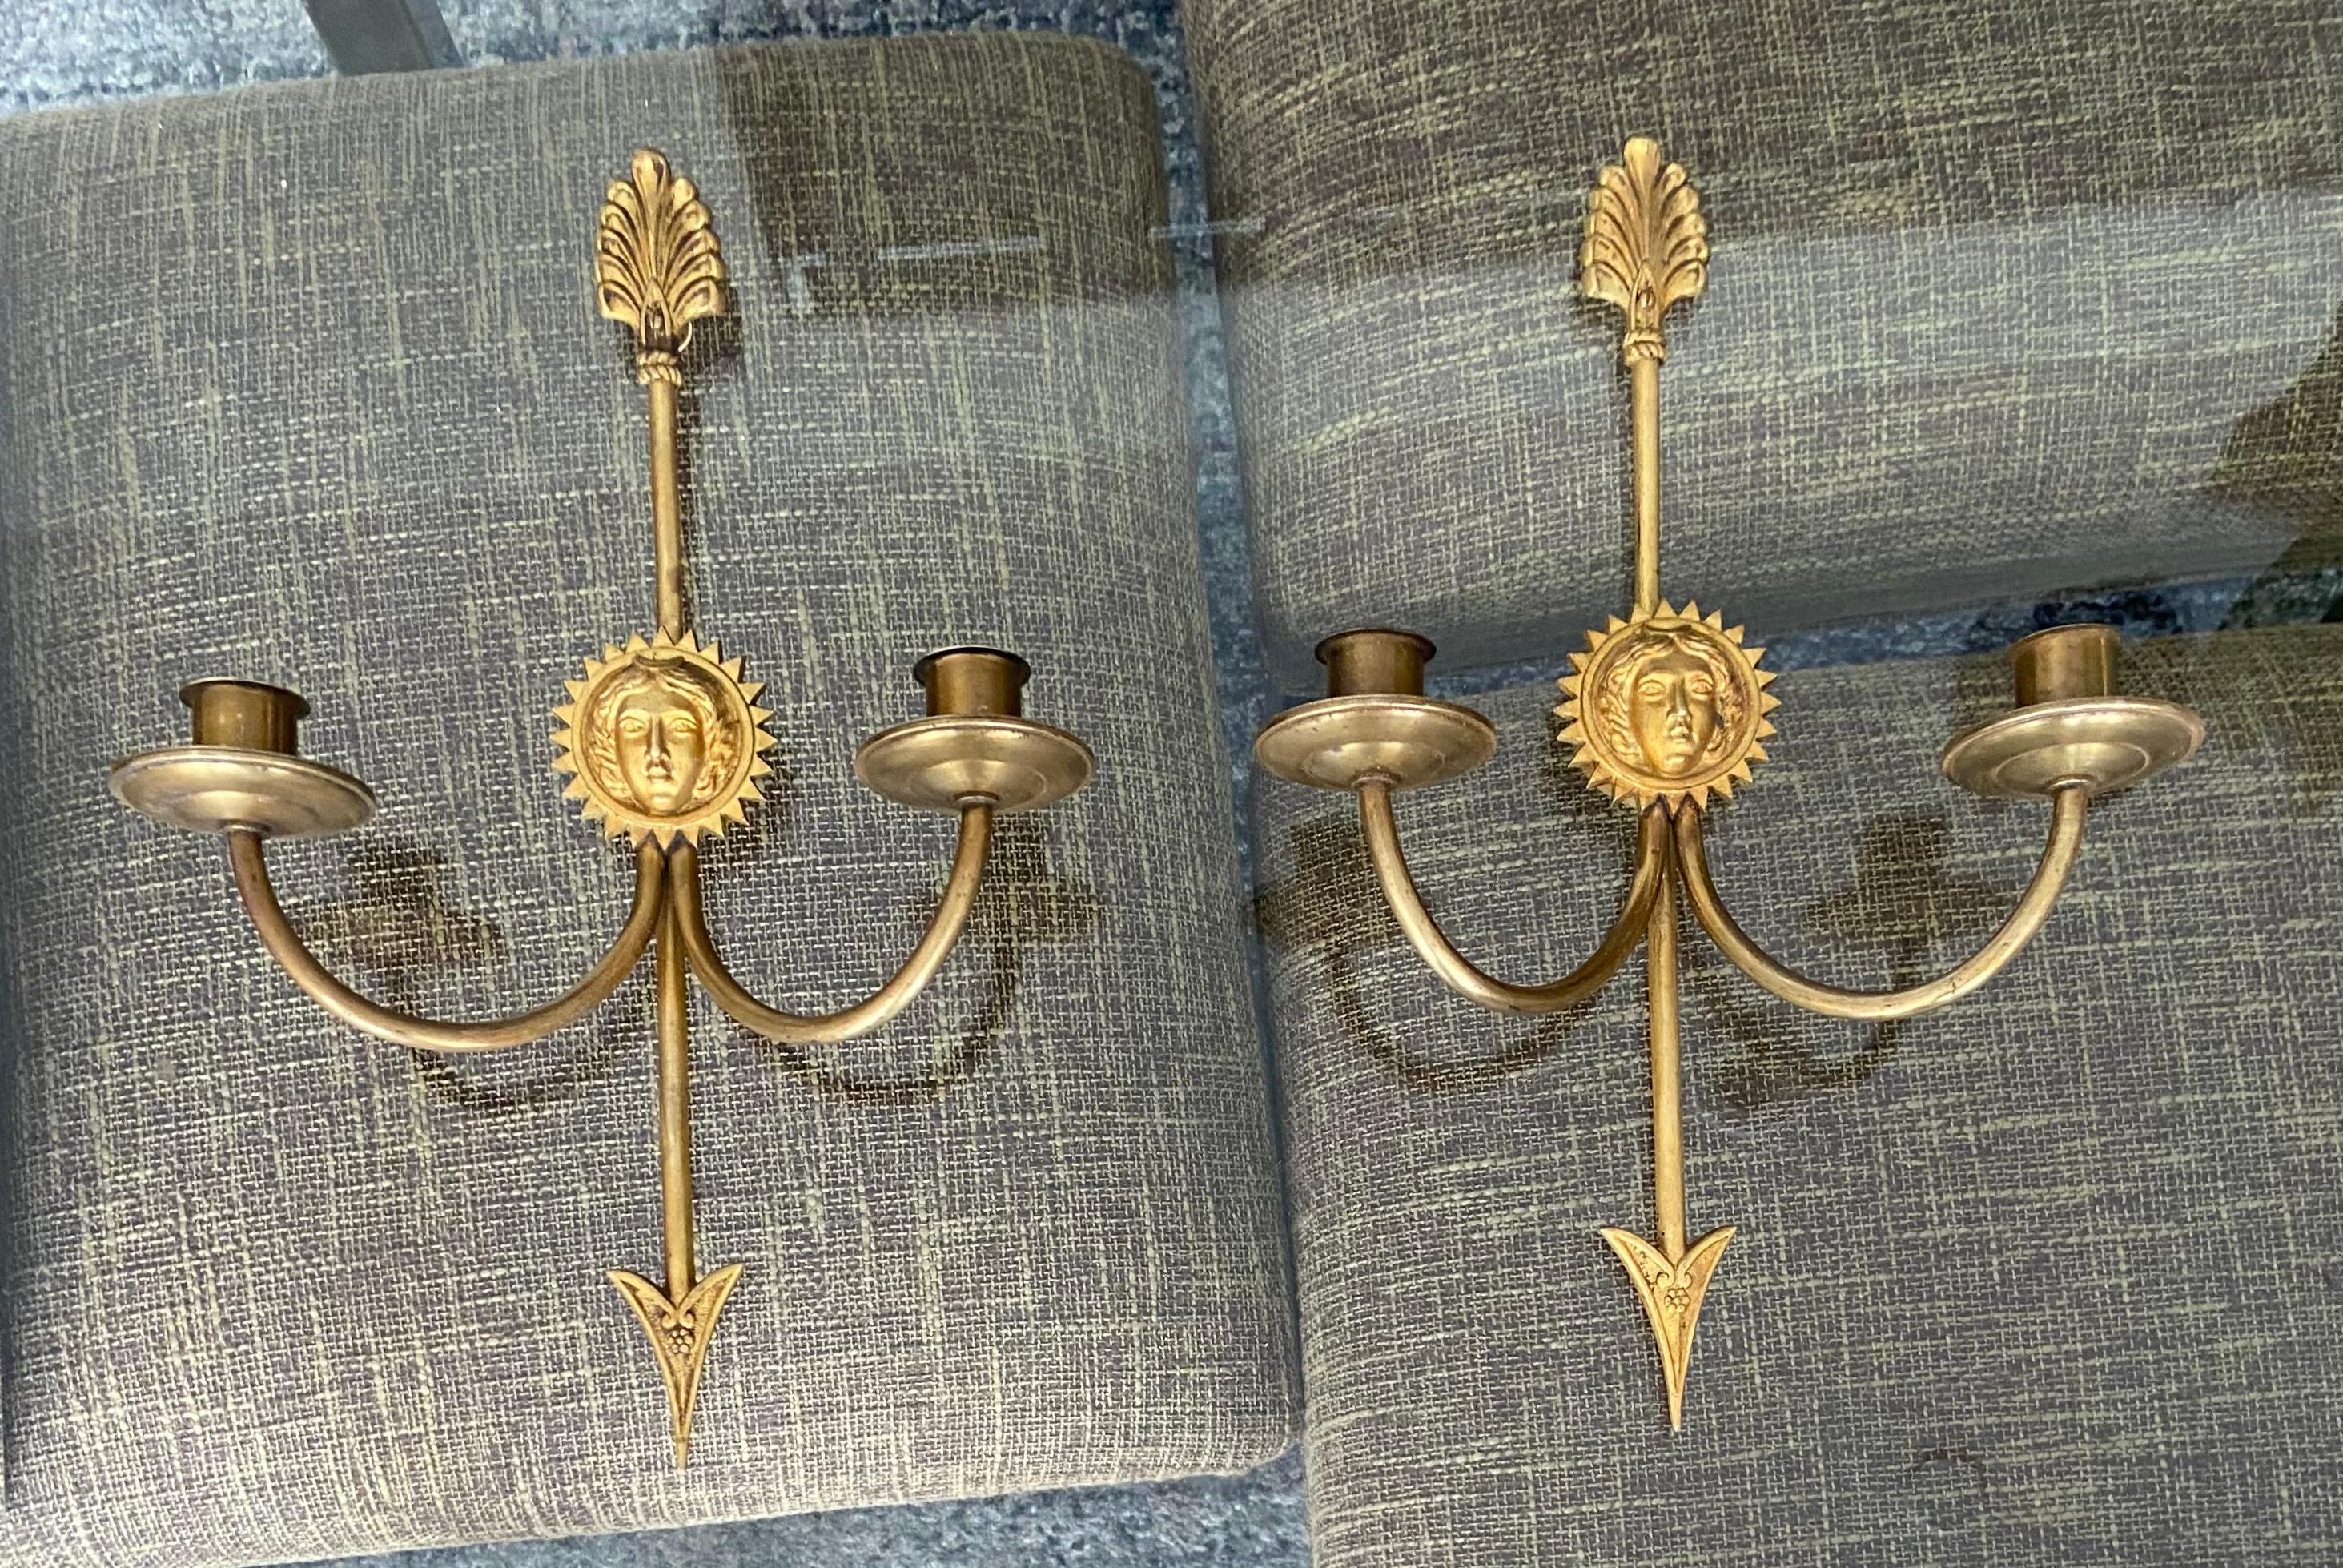 Pair of 1920s French Empire style brass 2 arm candle sconces with arrow and sun face motif. Not electrified.